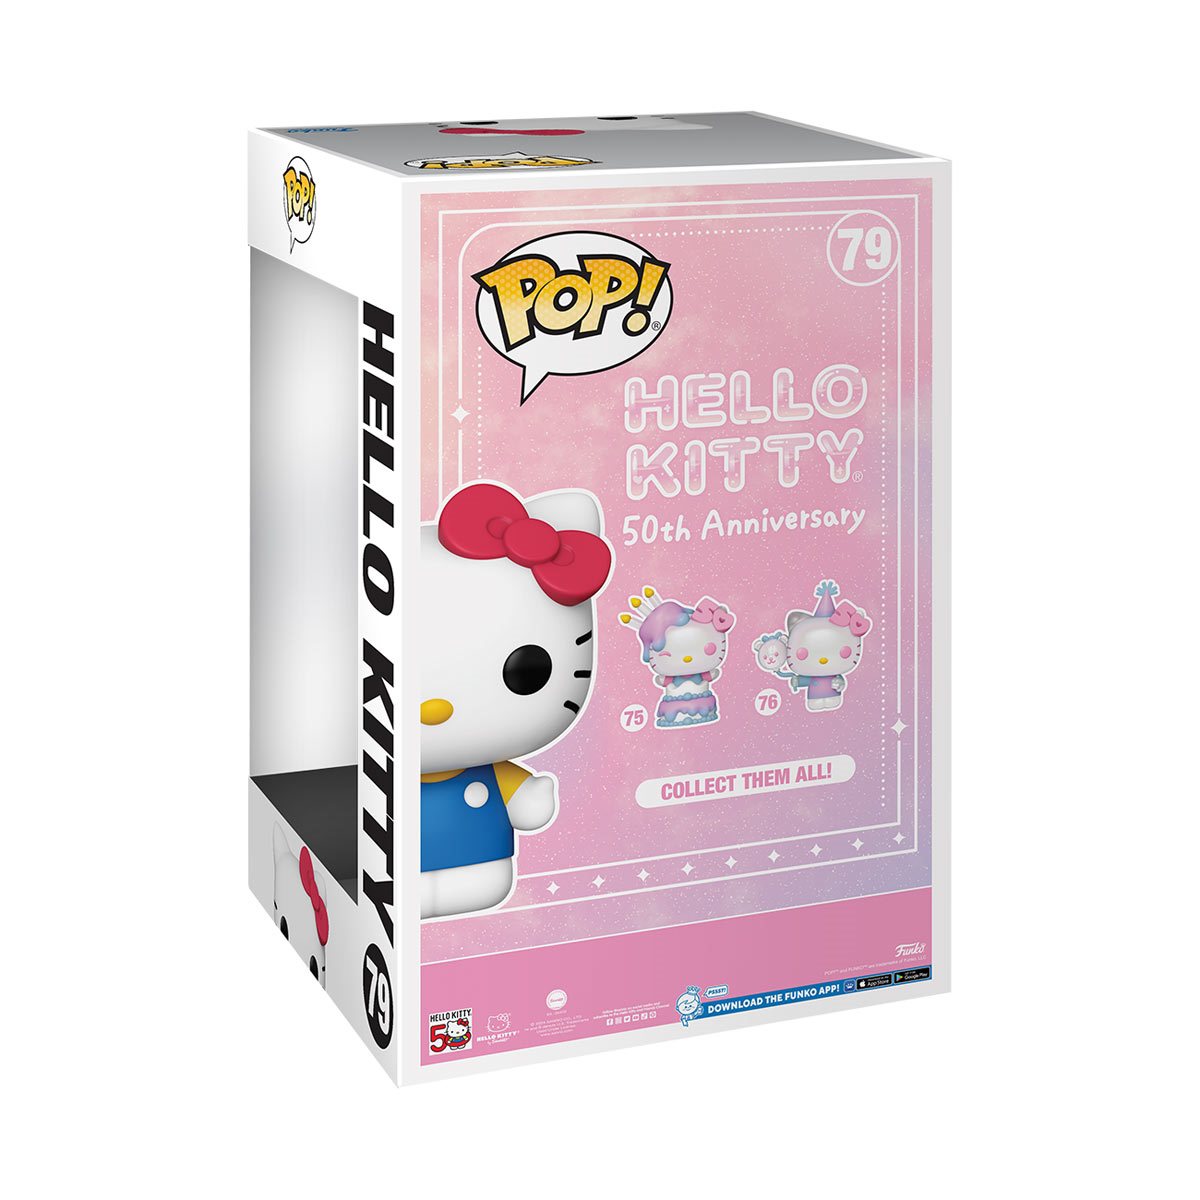 Ultimate Funko Pop Hello Kitty Figures Gallery and Checklist